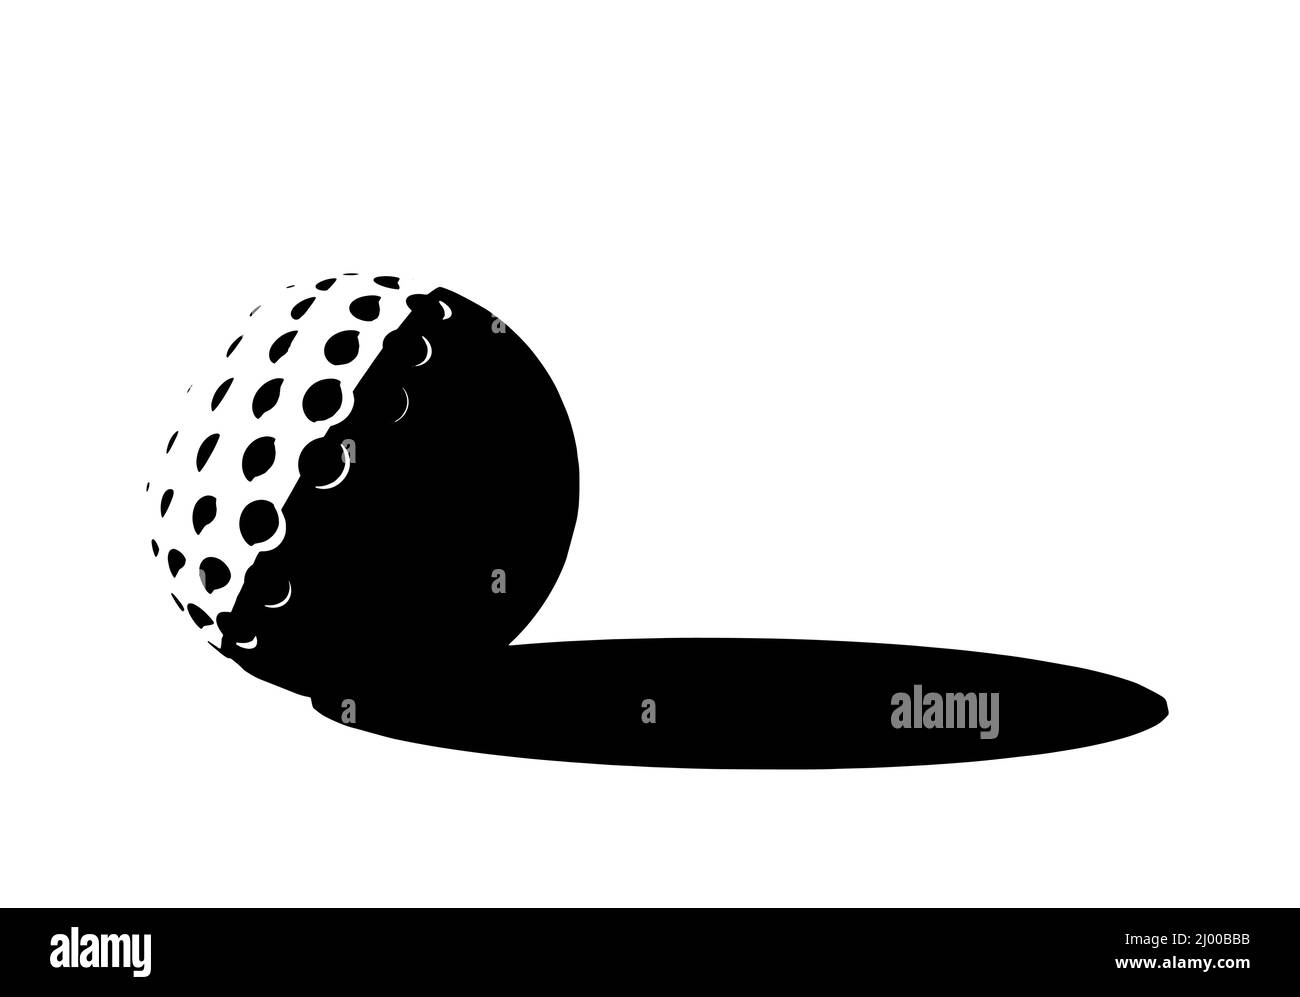 Stylized vector illustrations of golf ball Stock Vector